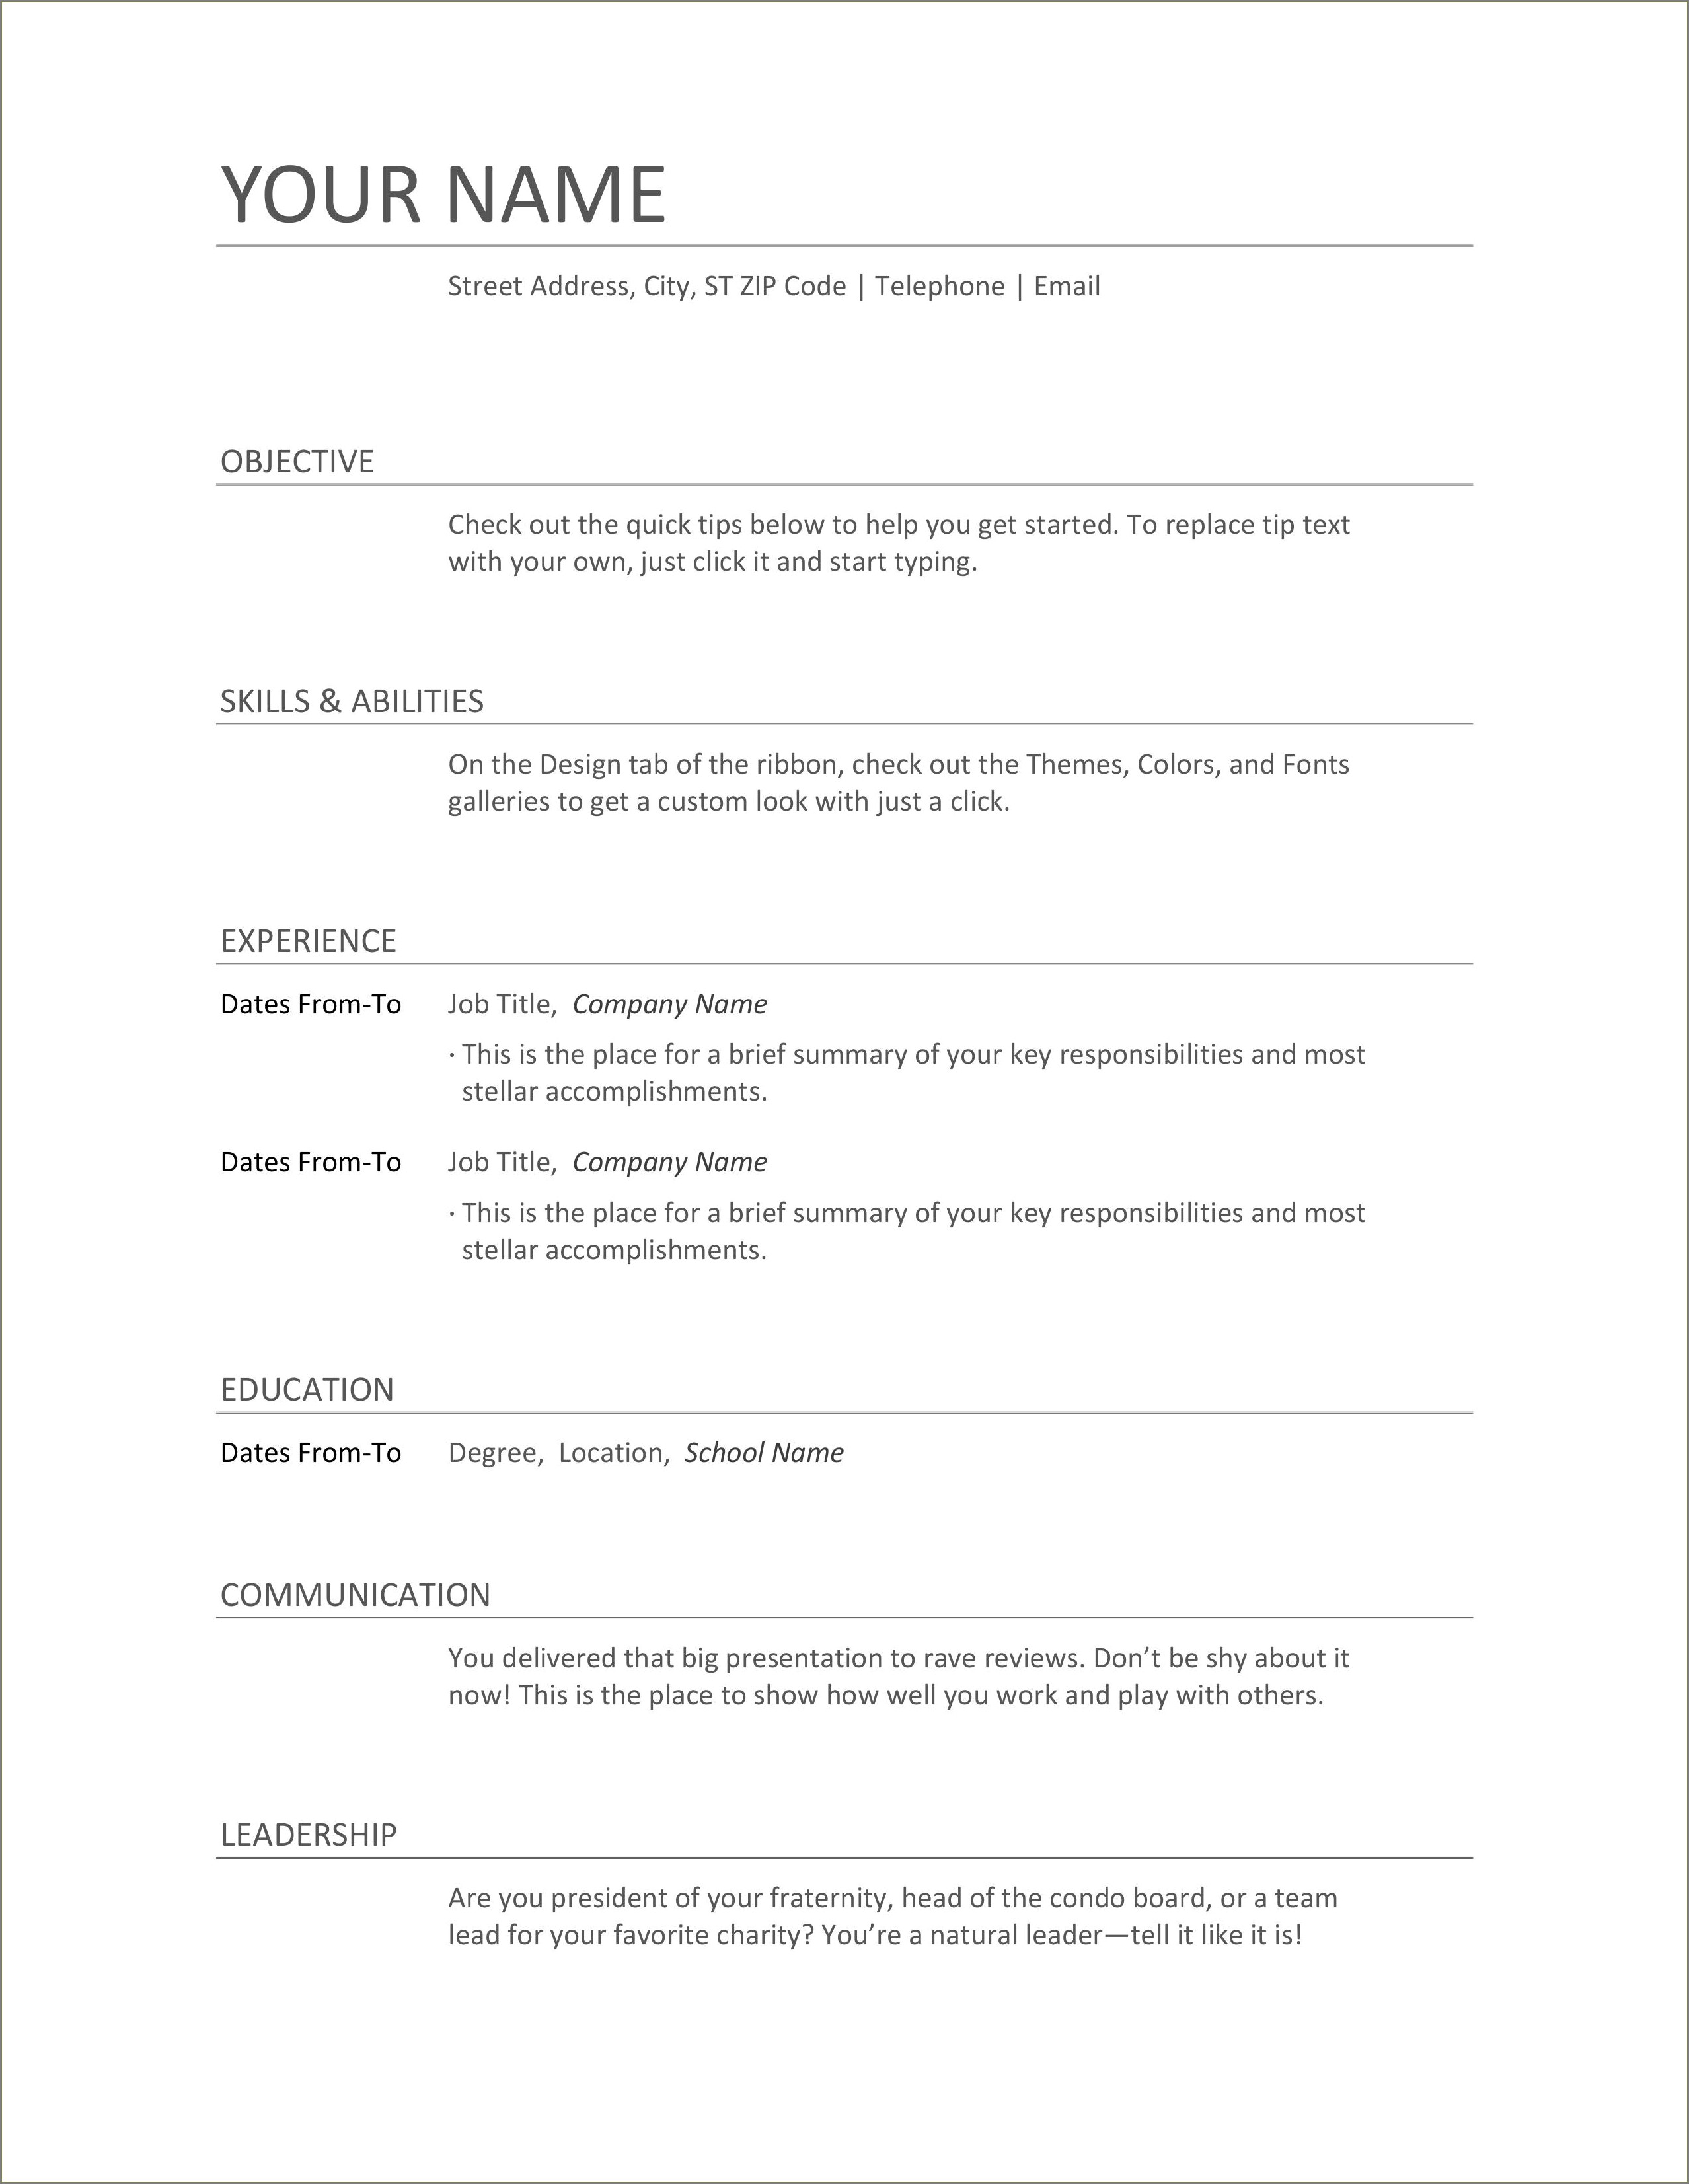 Resume Layout Where To Put Dates